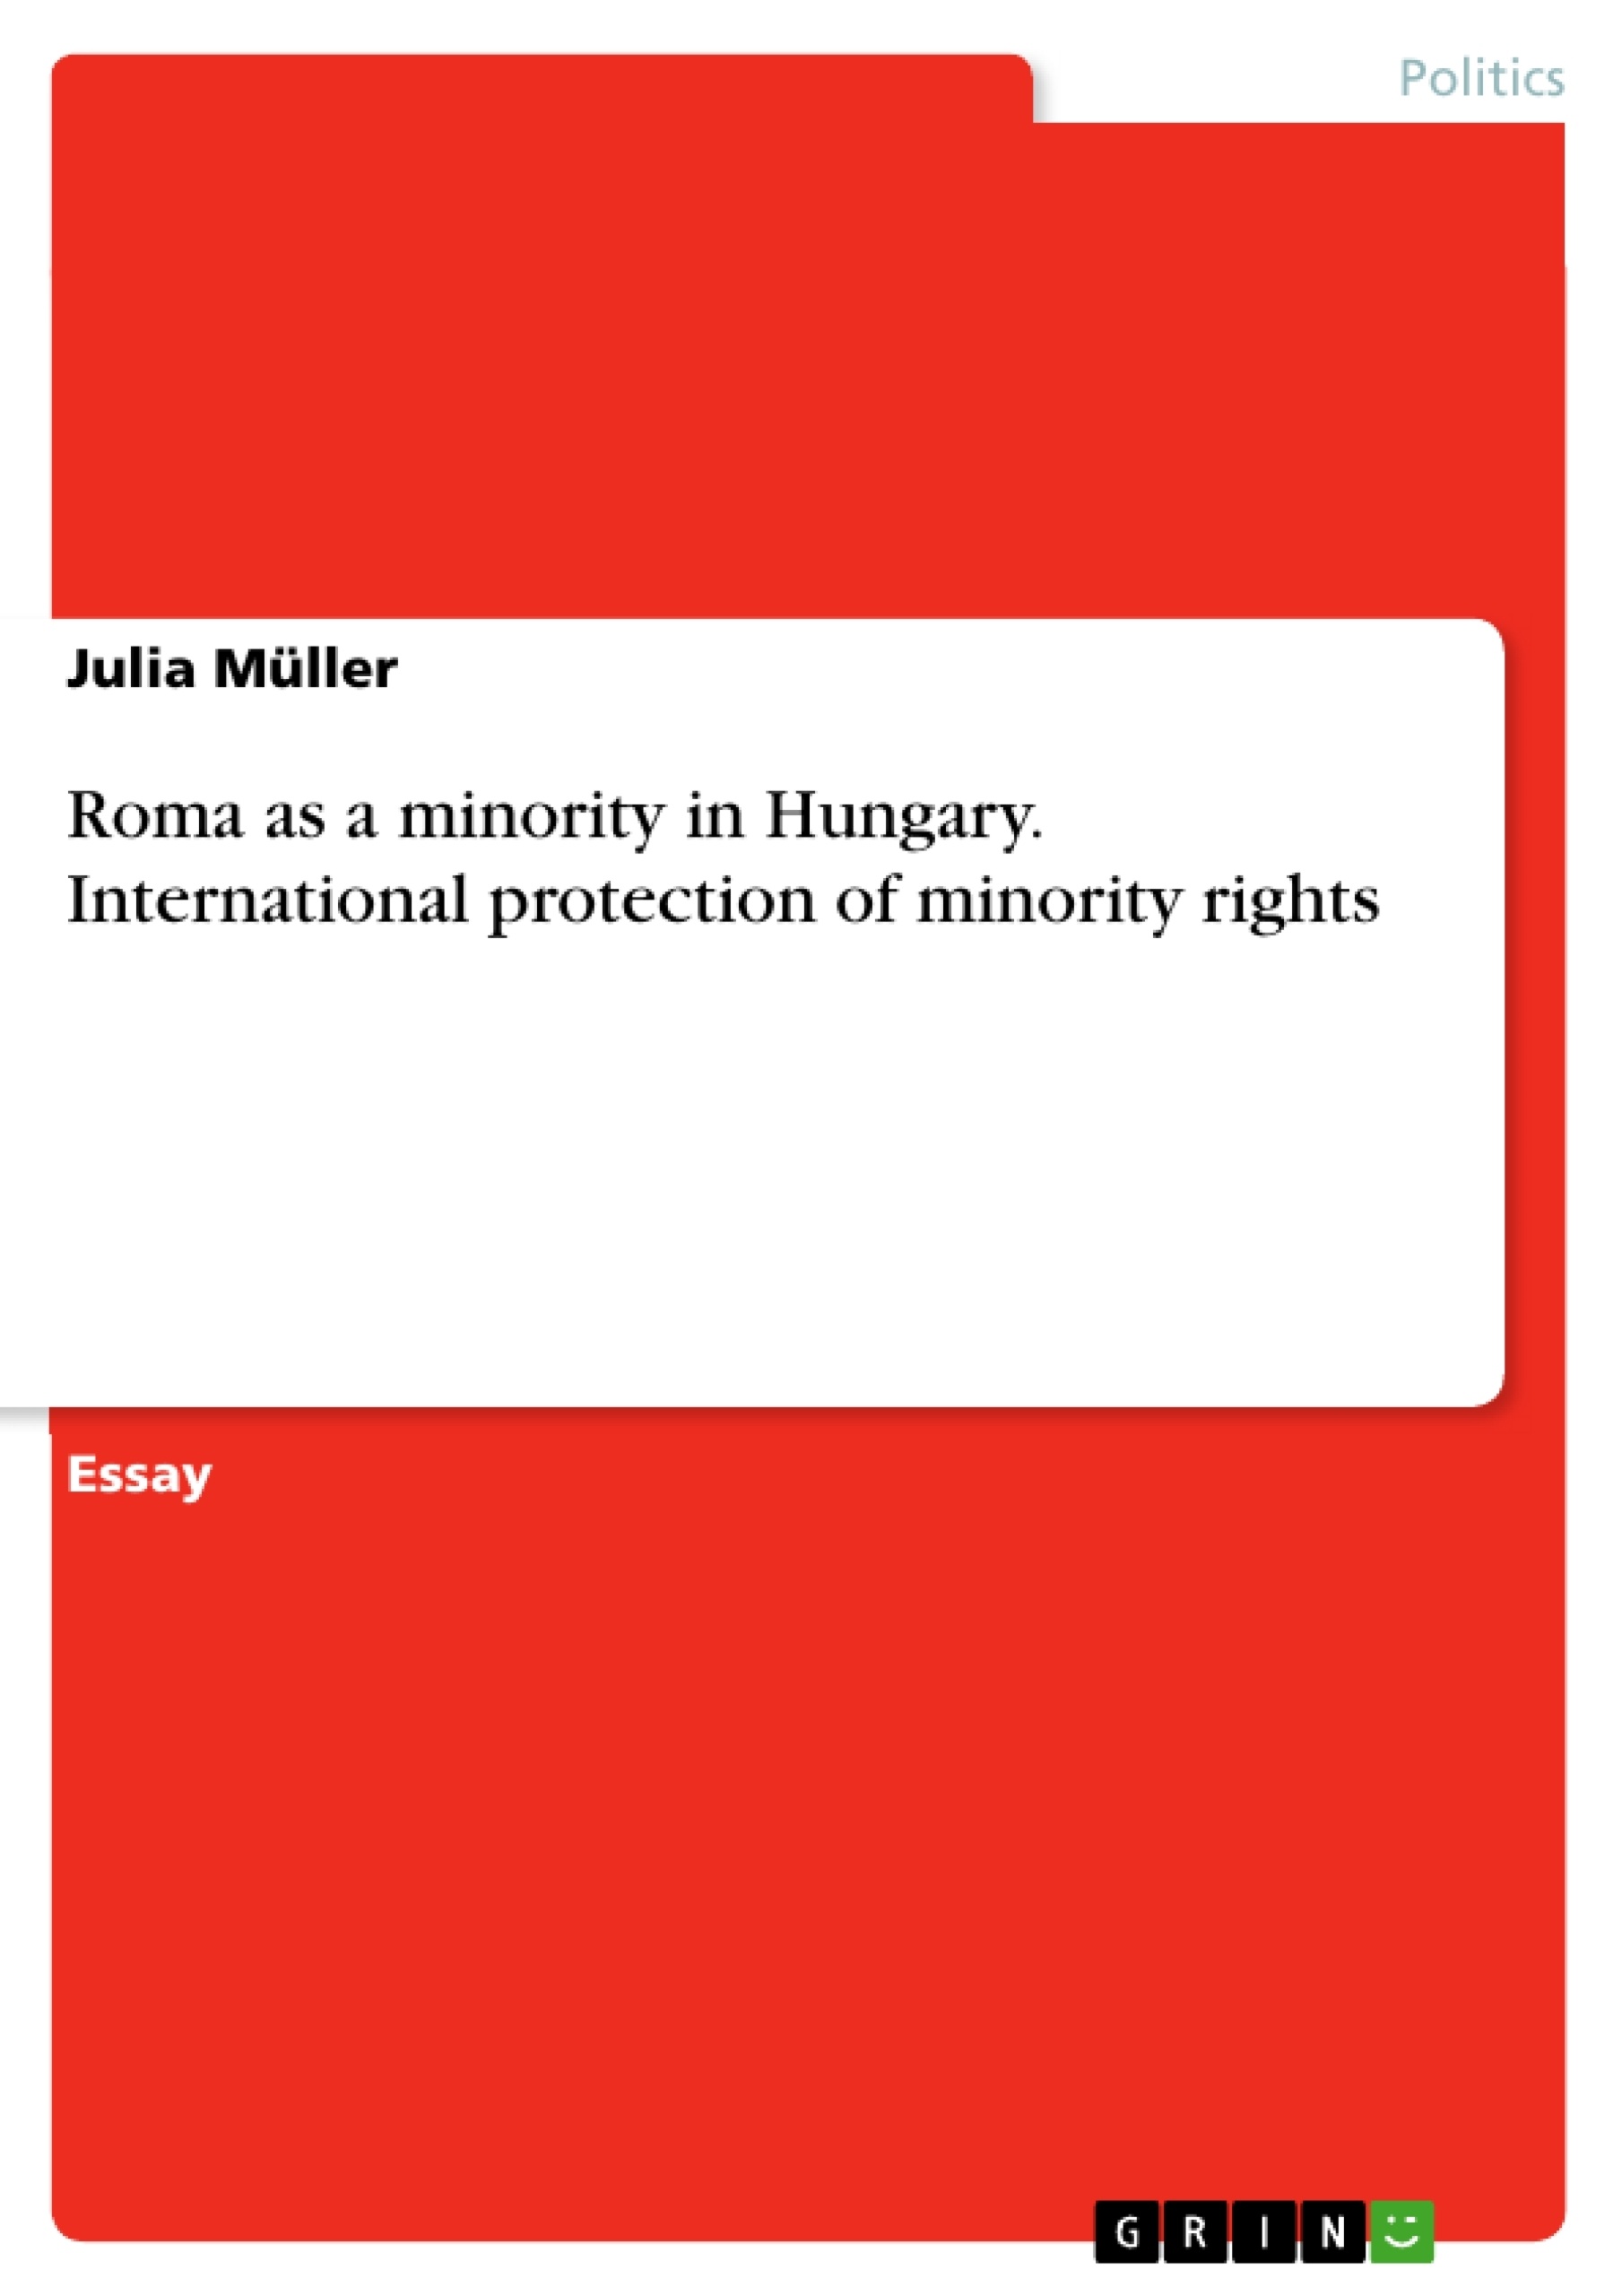 Title: Roma as a minority in Hungary. International protection of minority rights